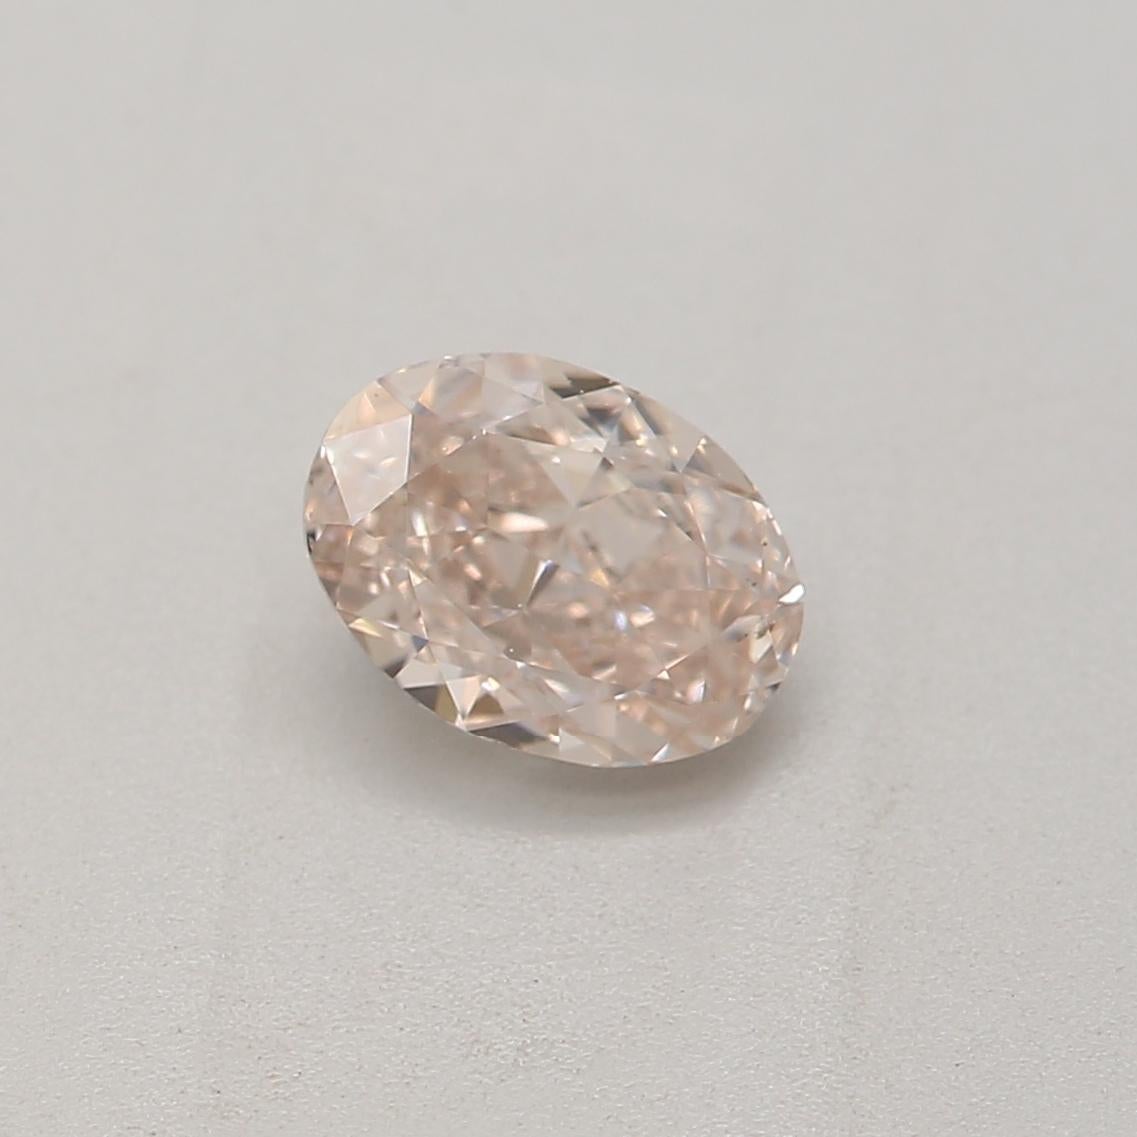 *100% NATURAL FANCY COLOUR DIAMOND*

✪ Diamond Details ✪

➛ Shape: Oval
➛ Colour Grade: Light Pink Brown
➛ Carat: 0.42
➛ Clarity: Si2
➛ GIA Certified 

^FEATURES OF THE DIAMOND^

This 0.42 carat diamond refers to a diamond that weighs 0.42 carats,